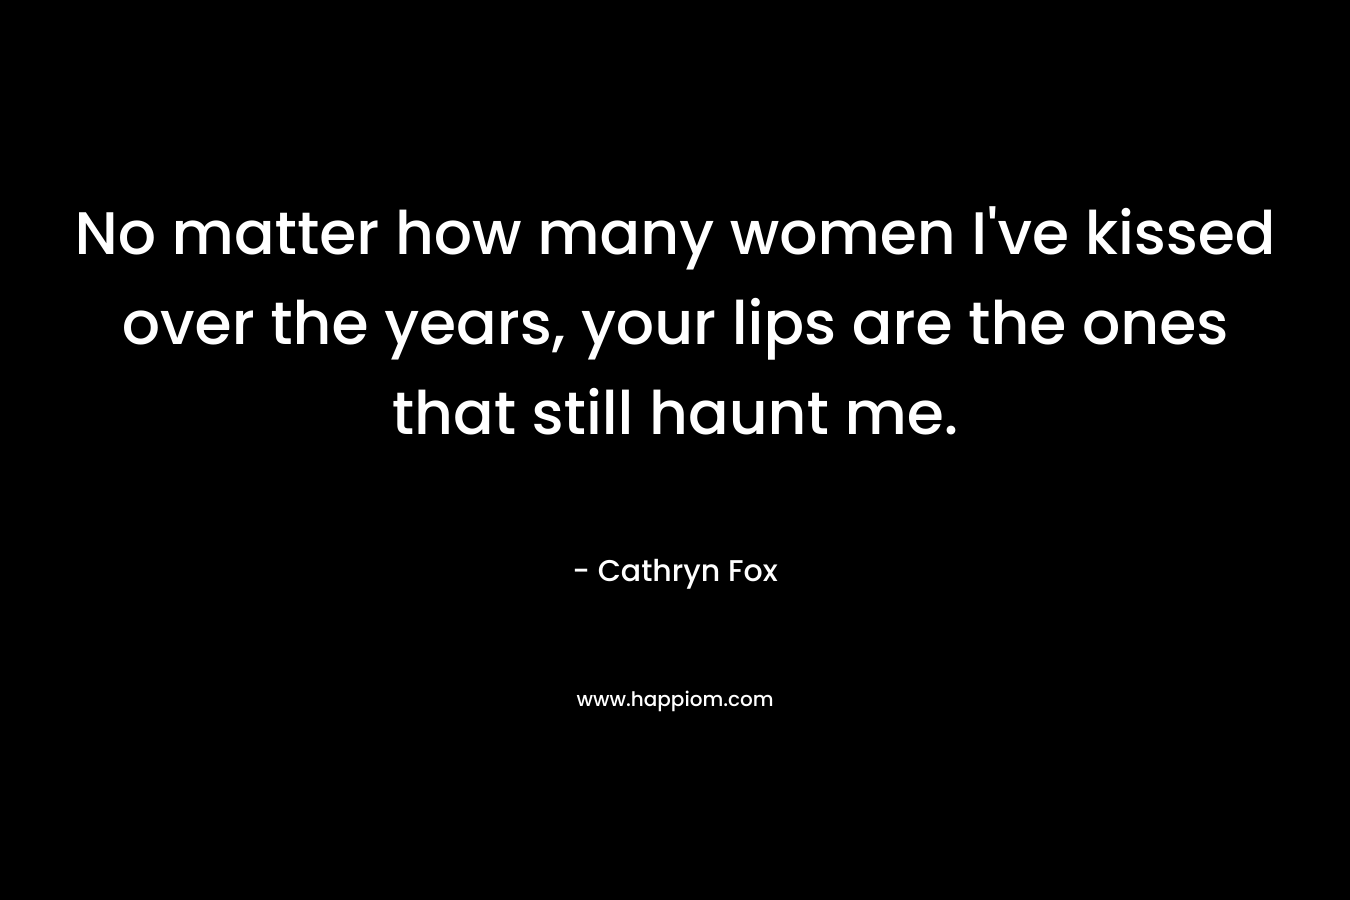 No matter how many women I’ve kissed over the years, your lips are the ones that still haunt me. – Cathryn Fox